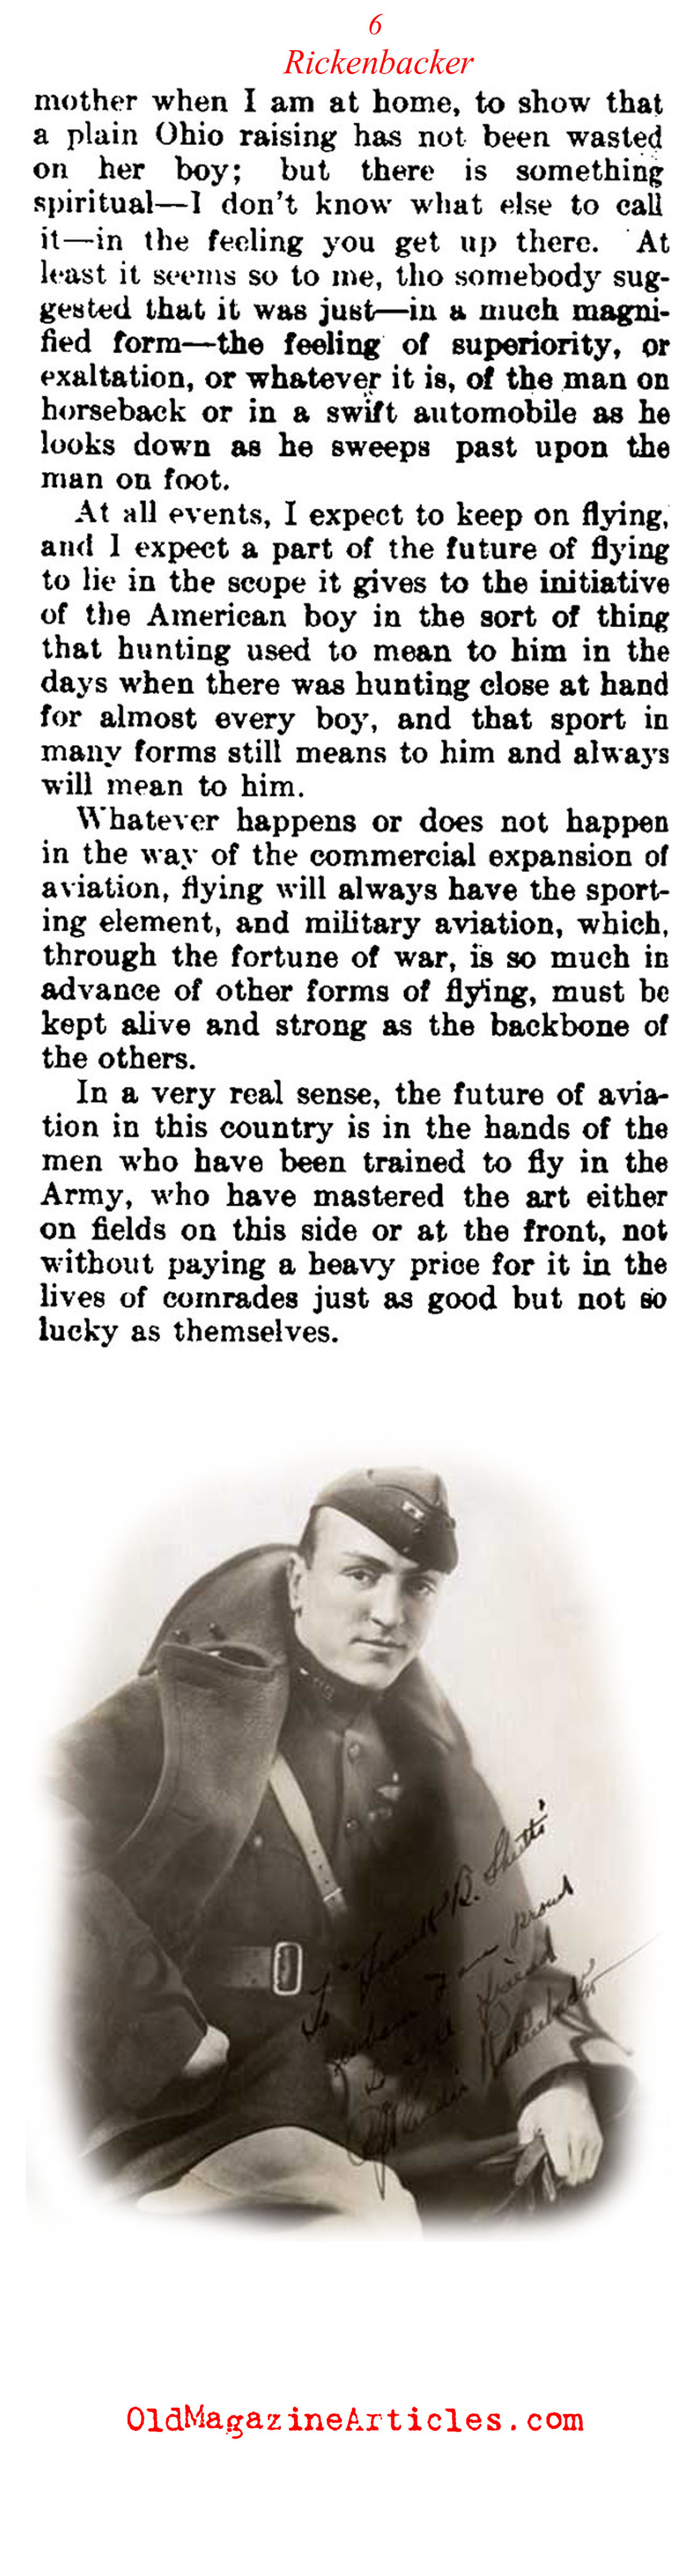 Captain Eddy Rickenbacker: Ace of Aces (The Literary Digest, 1919)